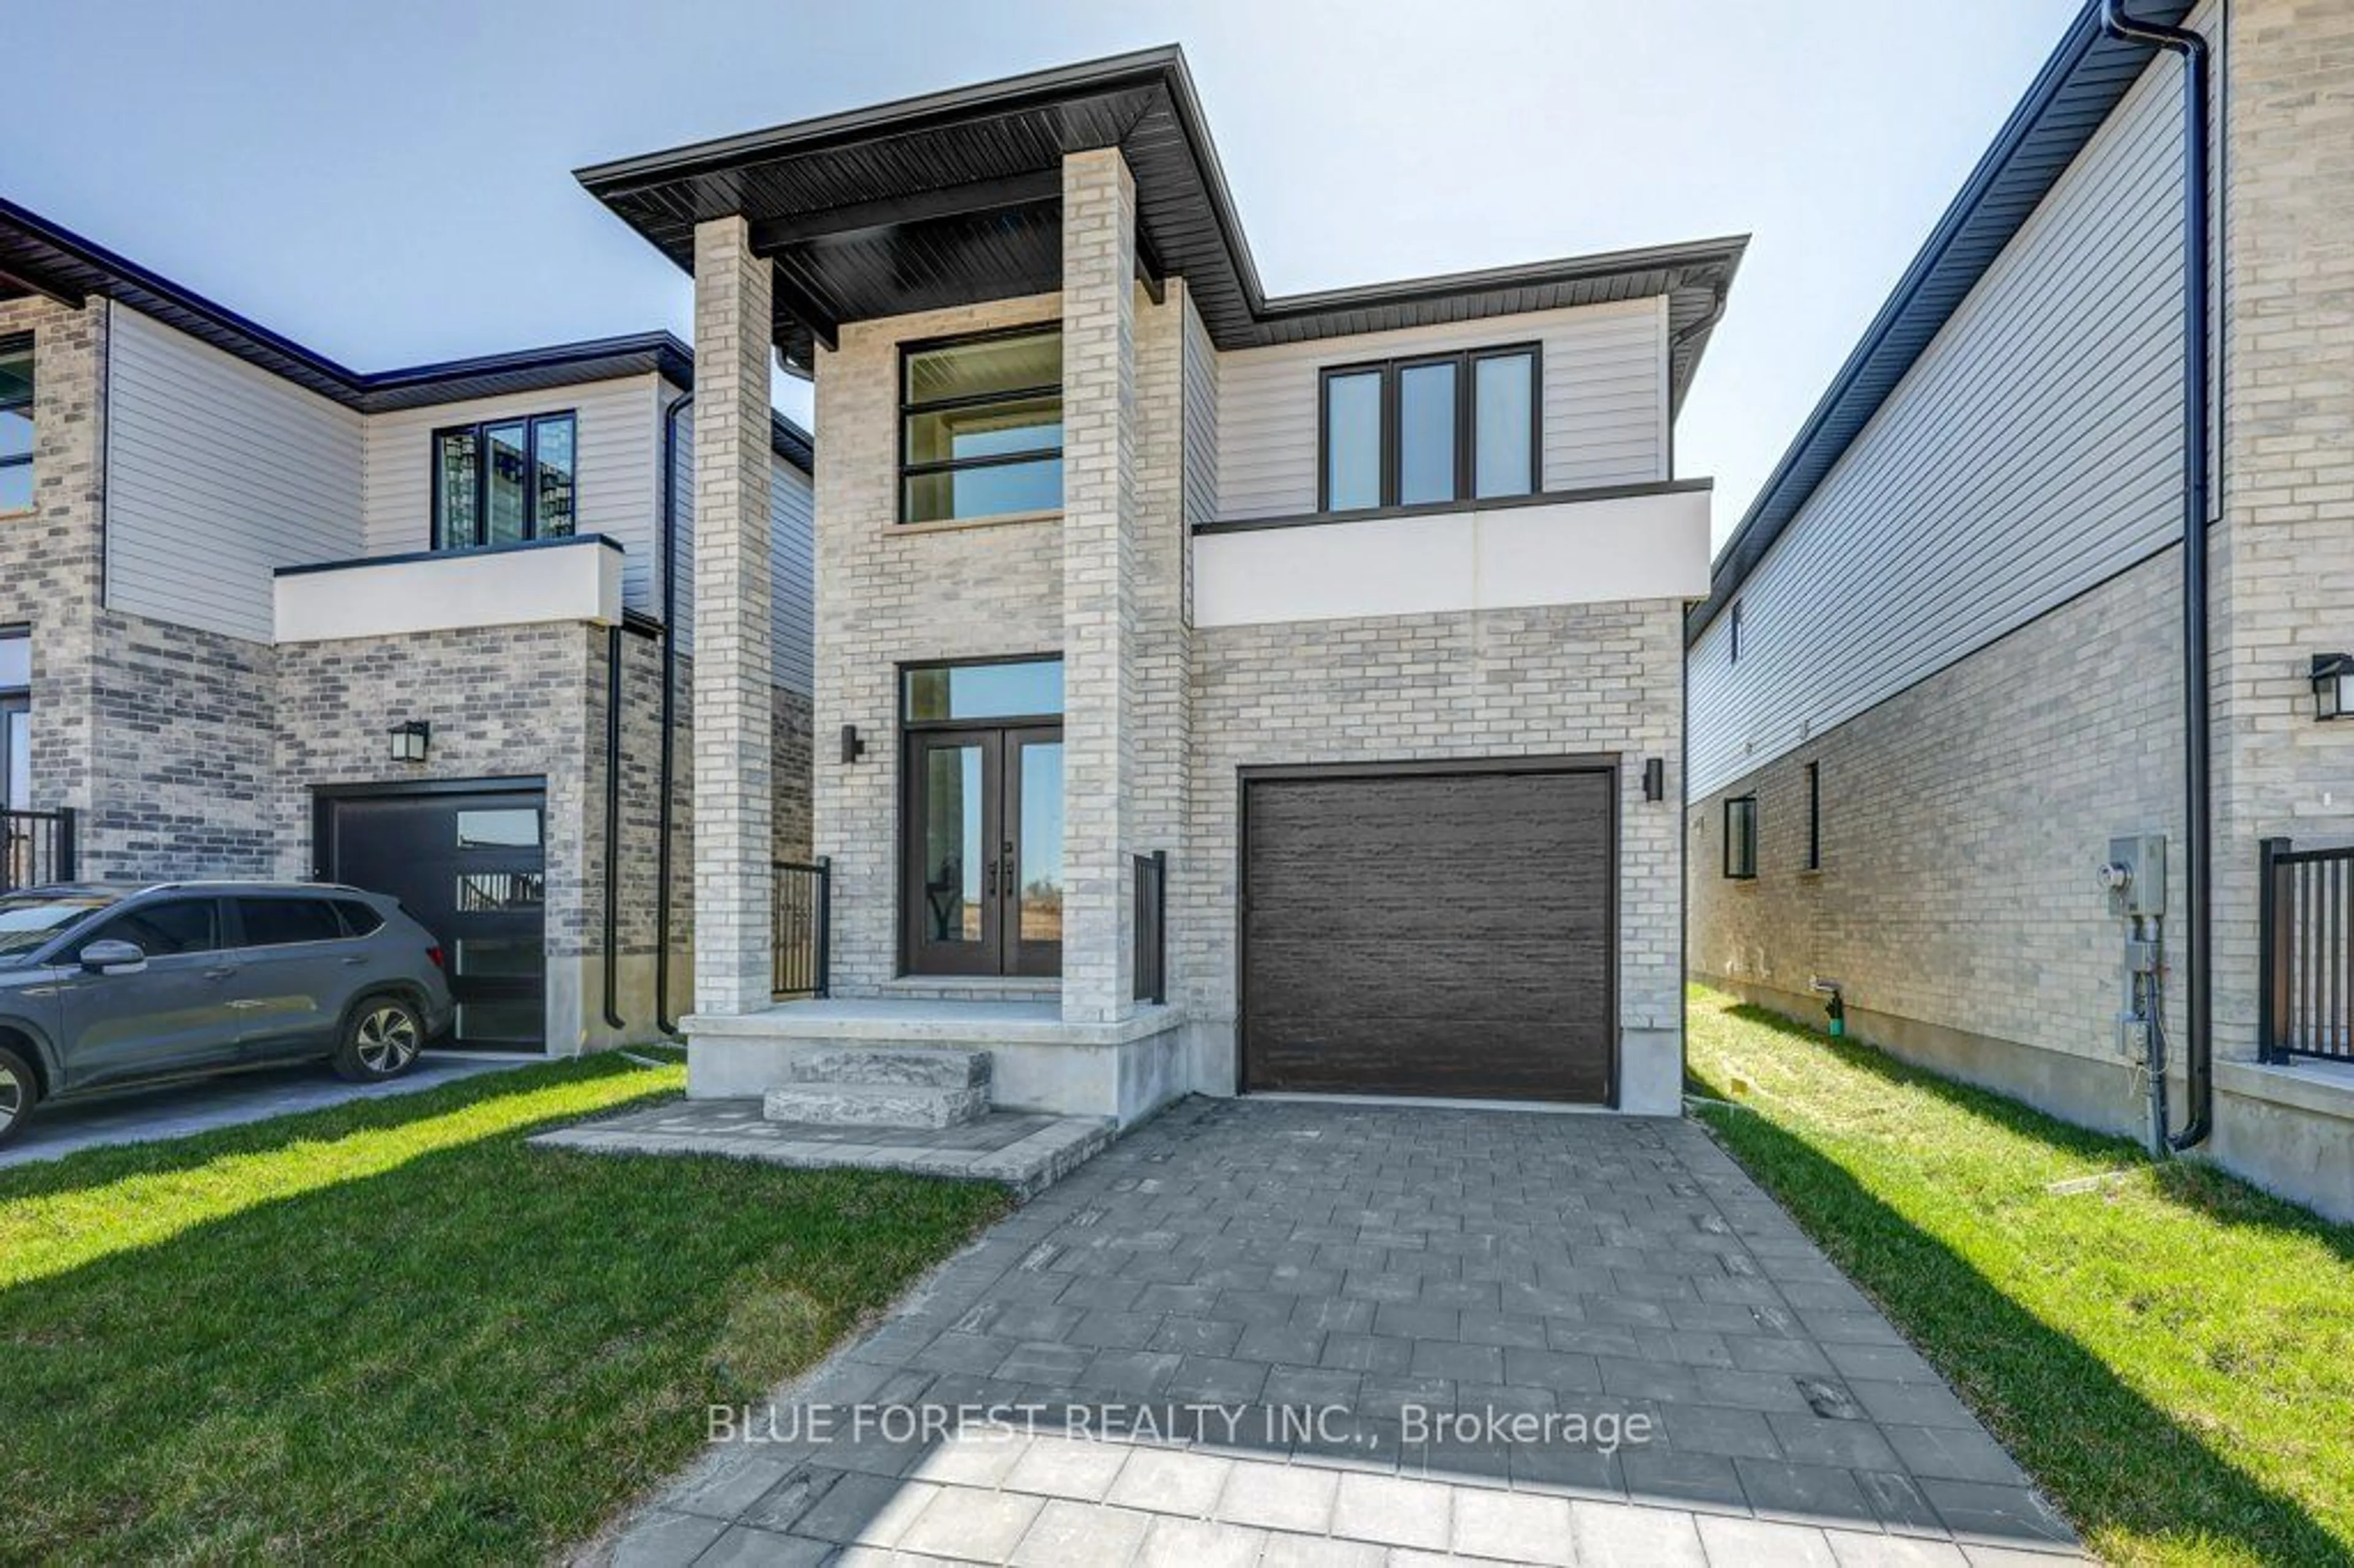 Home with brick exterior material for 6441 Royal Magnolia Ave, London Ontario N6P 1H5